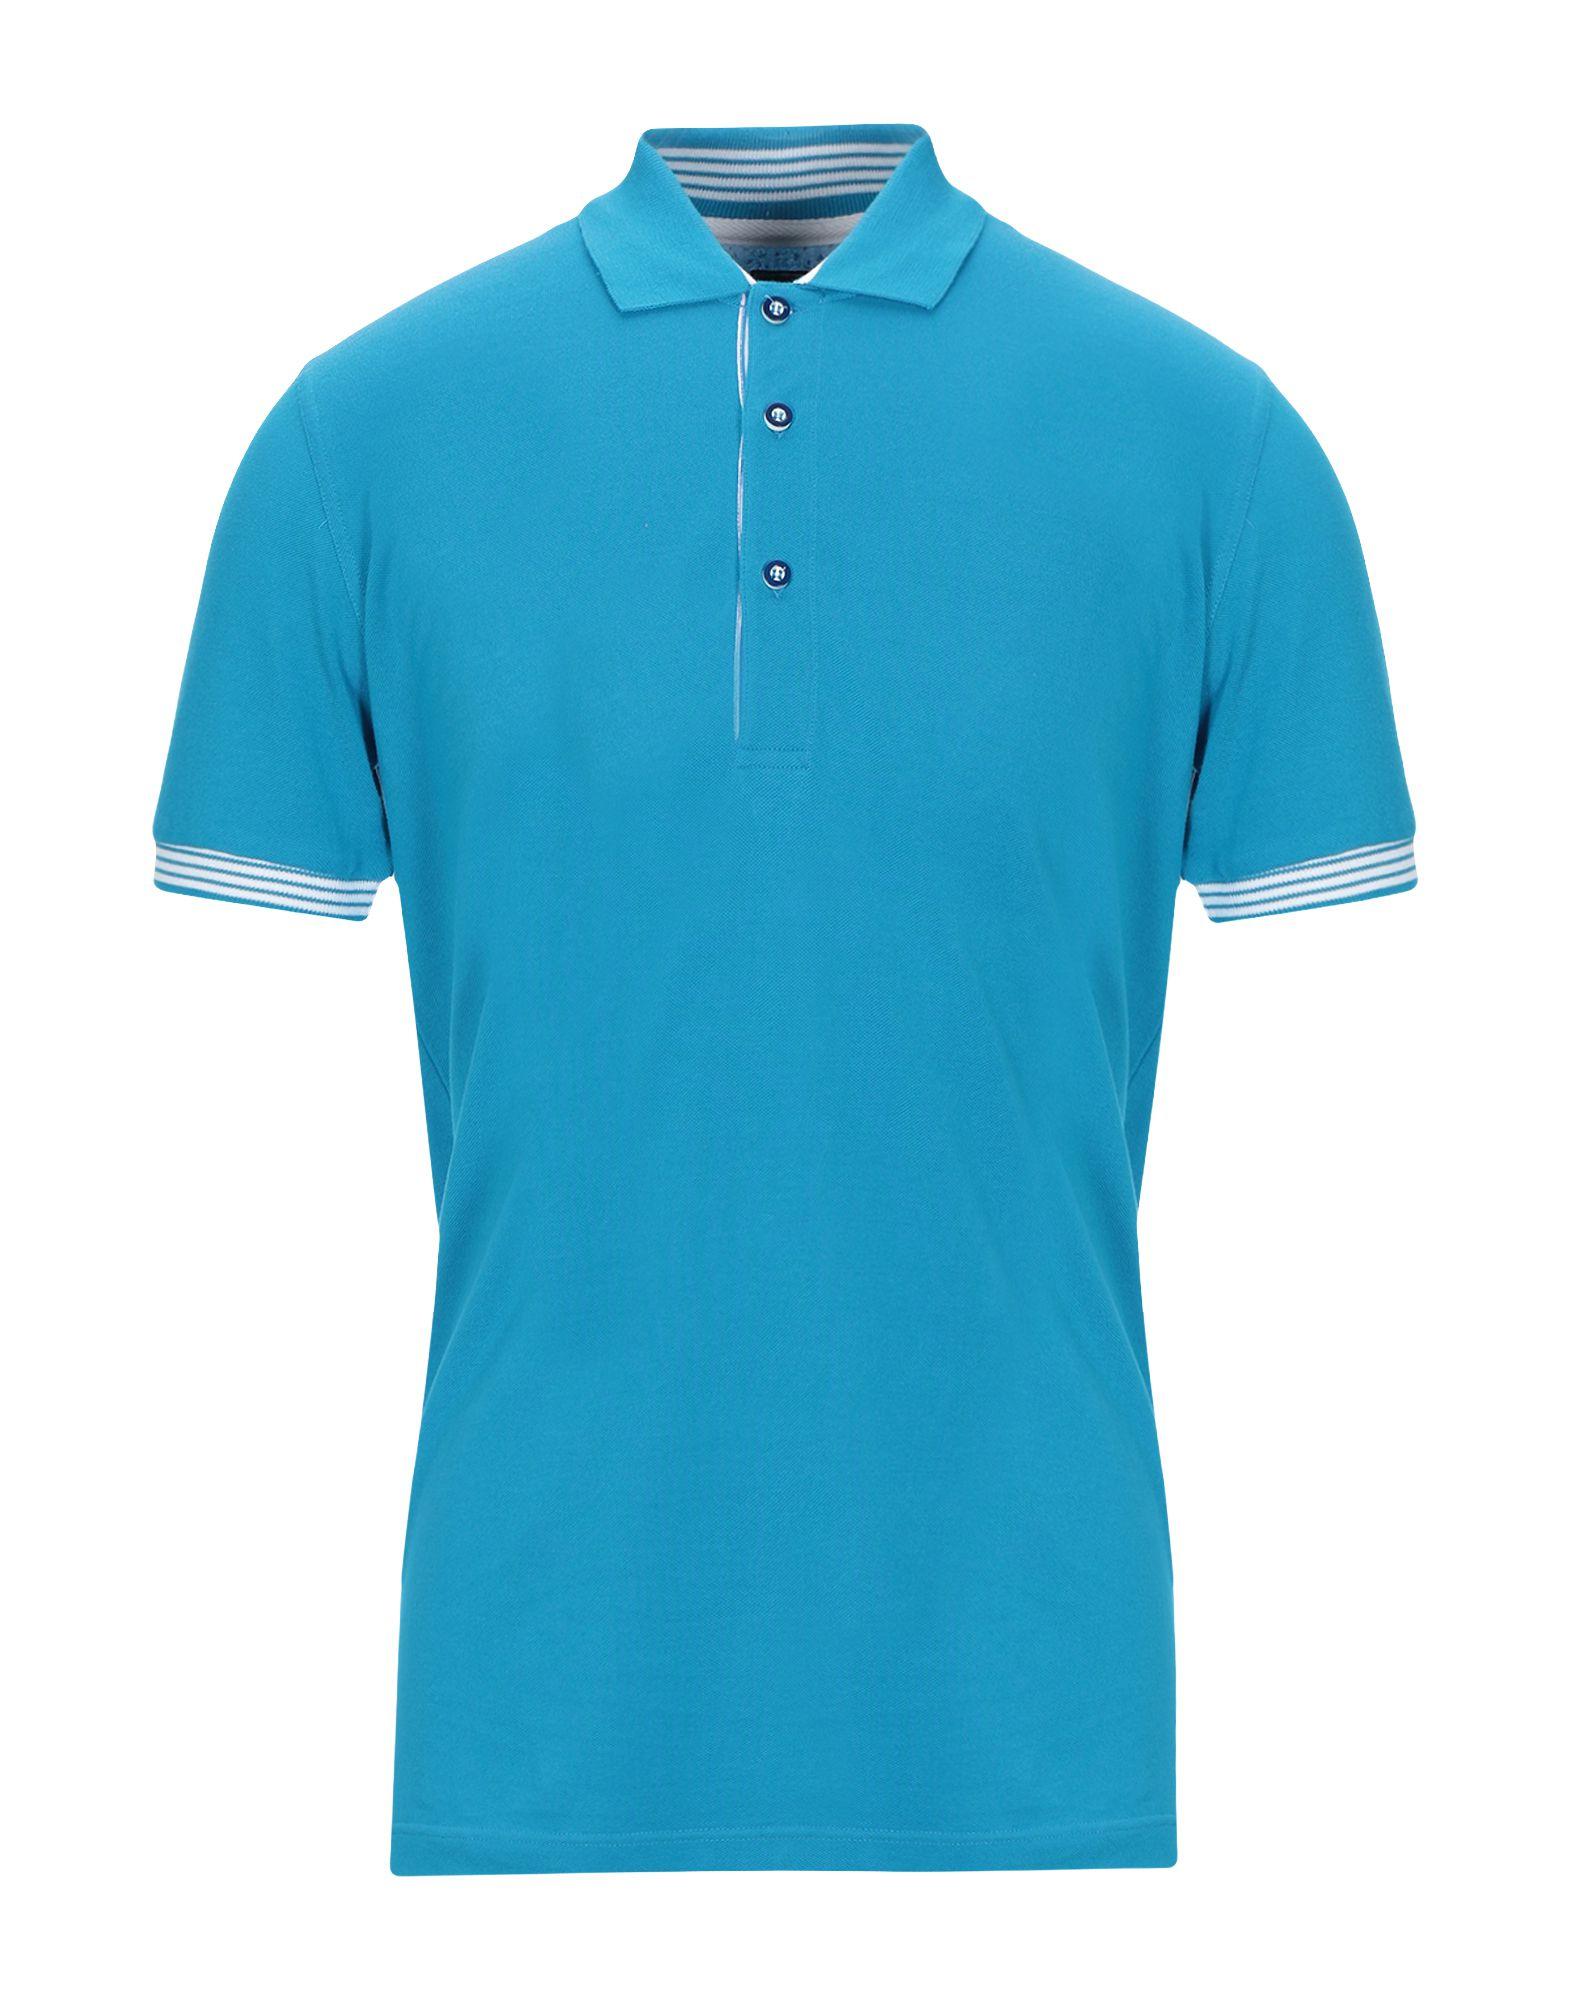 Fedeli Cotton Polo Shirt in Pastel Blue (Blue) for Men - Lyst